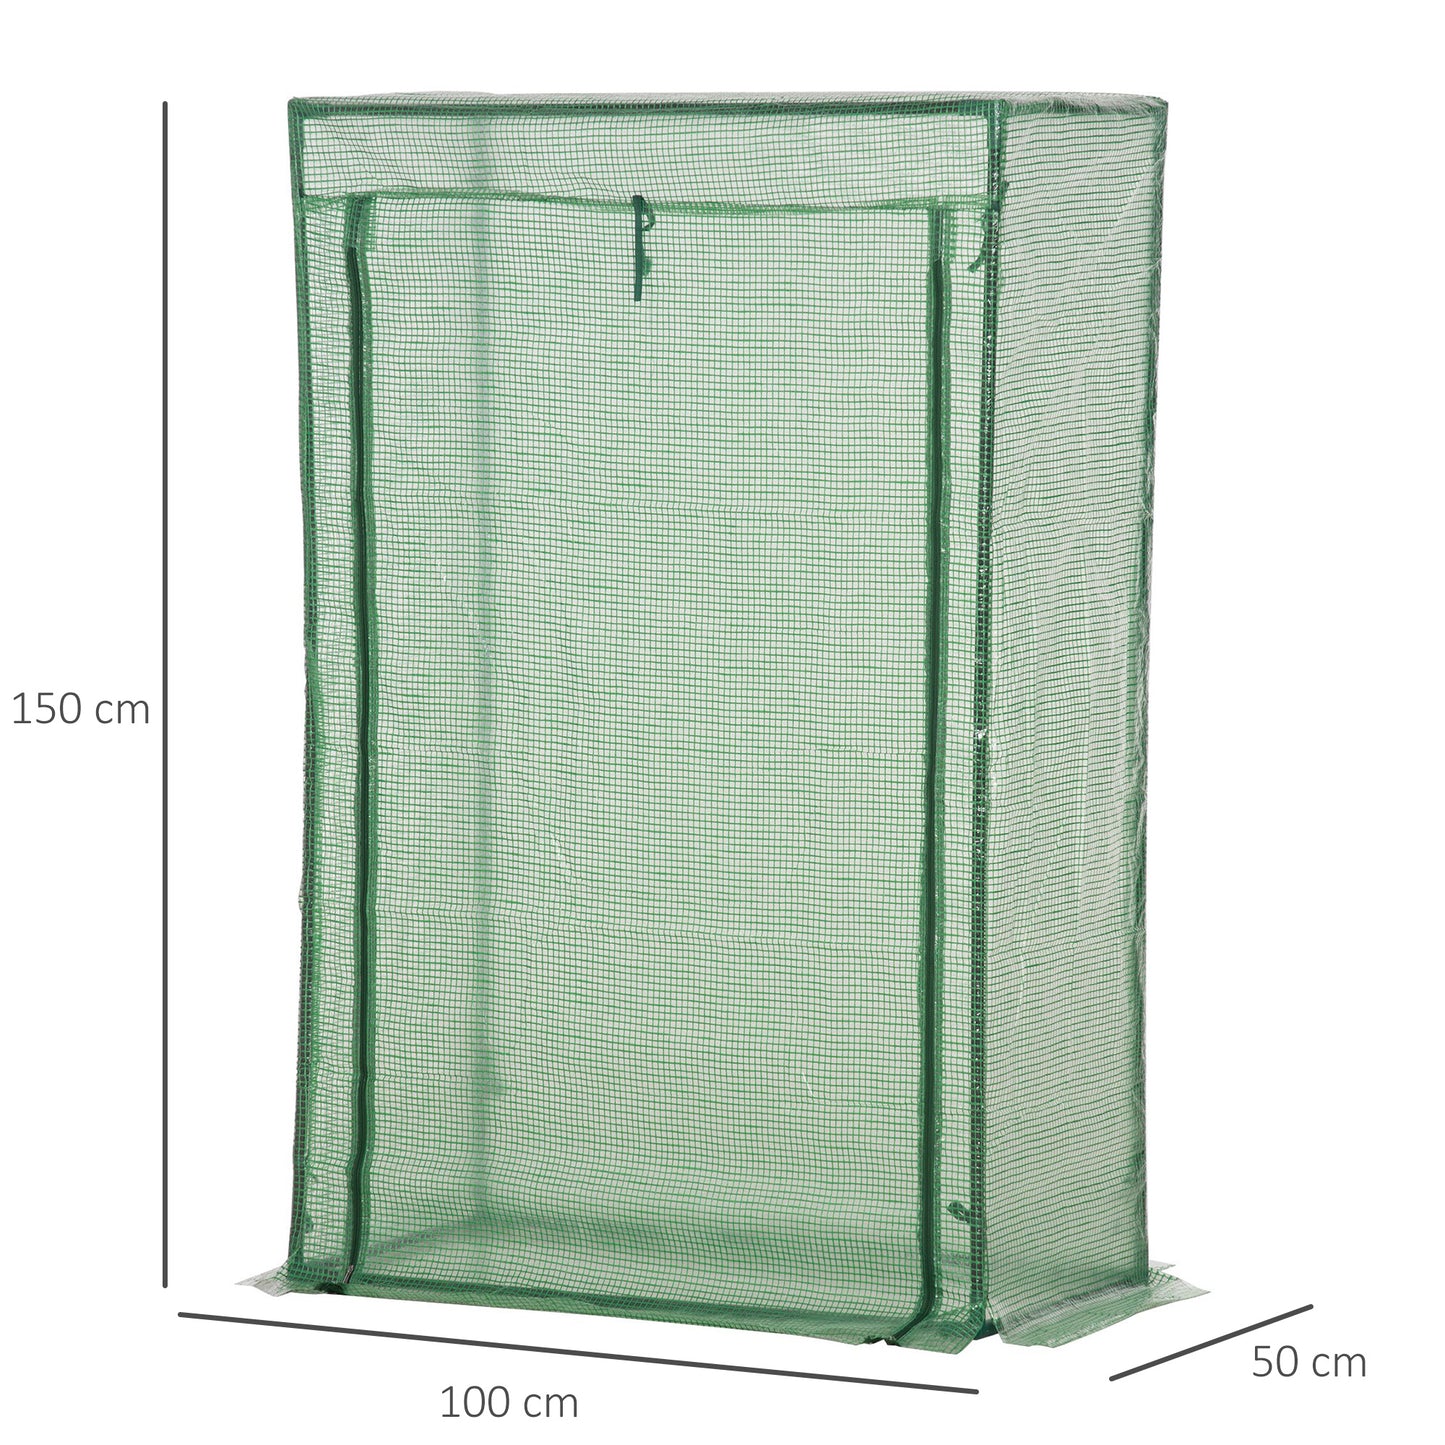 Outsunny 100 x 50 x 150cm Greenhouse Steel Frame PE Cover w-Roll-up Door Outdoor for Backyard, Balcony, Garden, Green